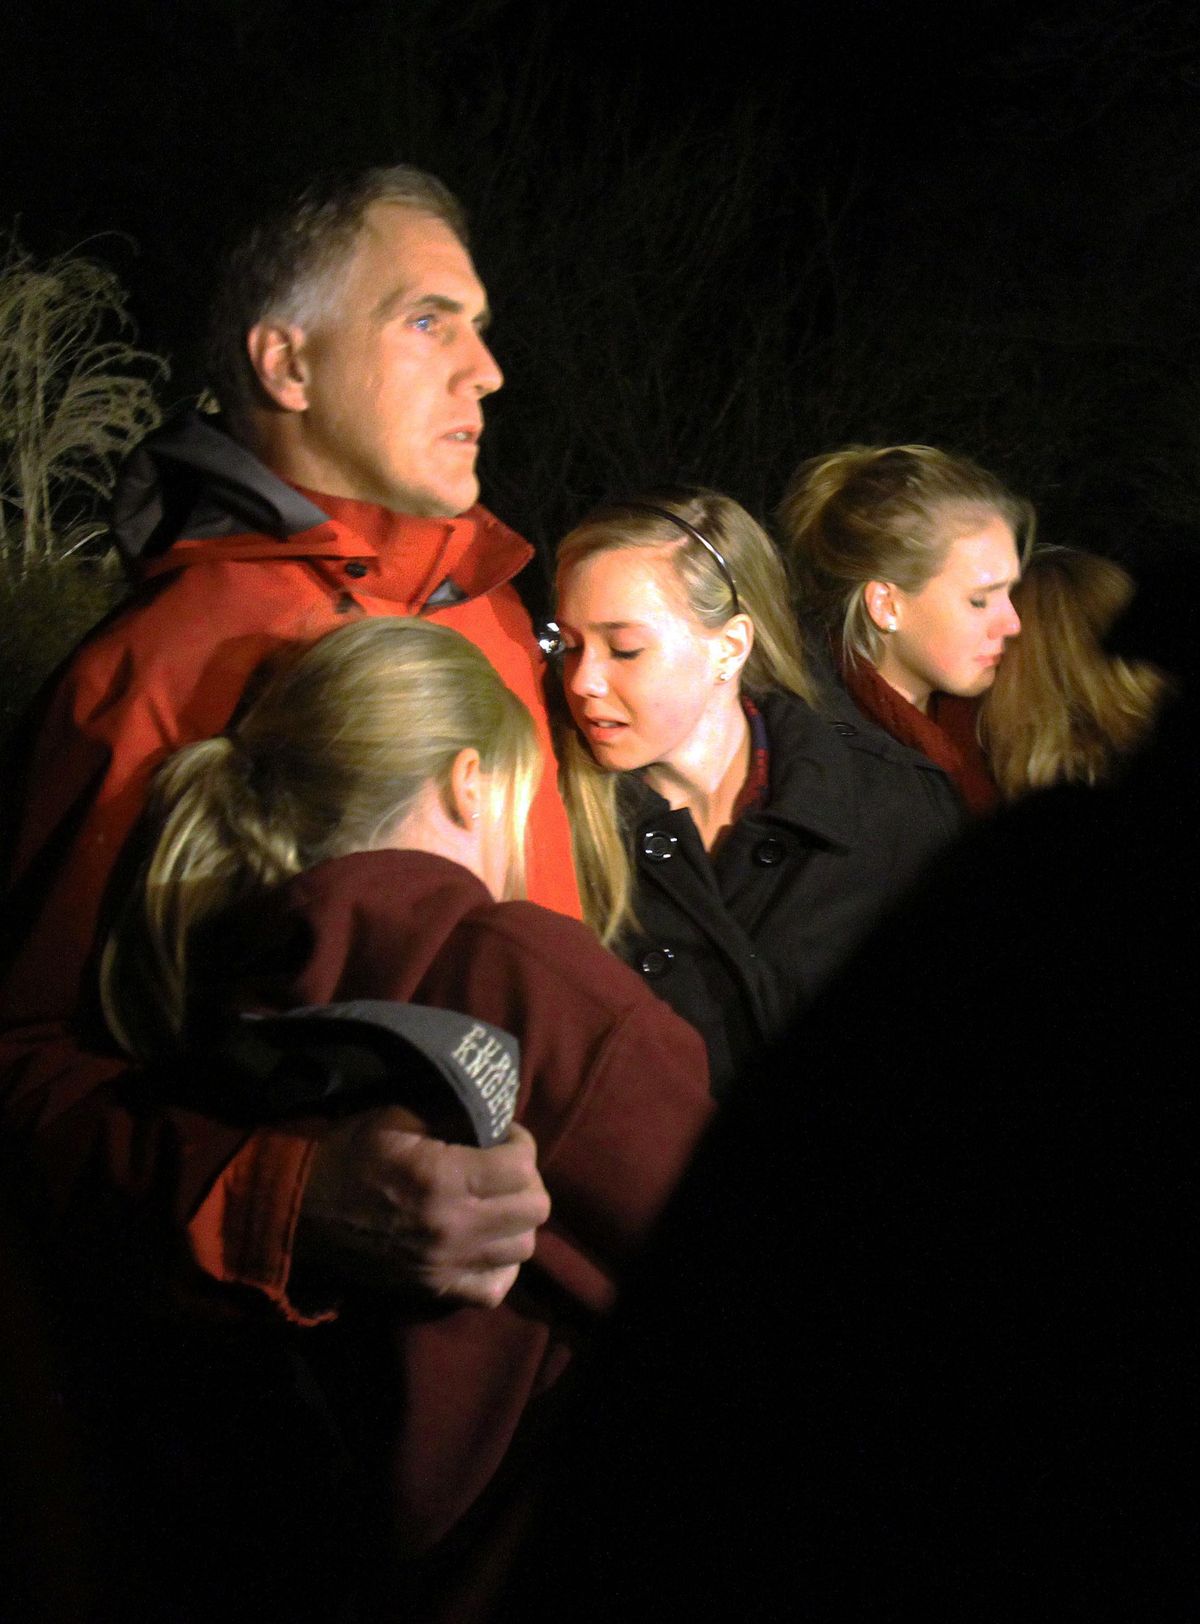 A man hugs his young daughters as they attend a vigil at Saint Rose of Lima church at Saint Rose of Lima church, Friday, Dec. 14, 2012 in Newtown, Conn. A man killed his mother at home and then opened fire Friday inside the elementary school where she taught, massacring 26 people, including 20 children, as youngsters cowered in fear to the sound of gunshots echoing through the building and screams coming over the intercom. (Frank Jr. / The Journal News)